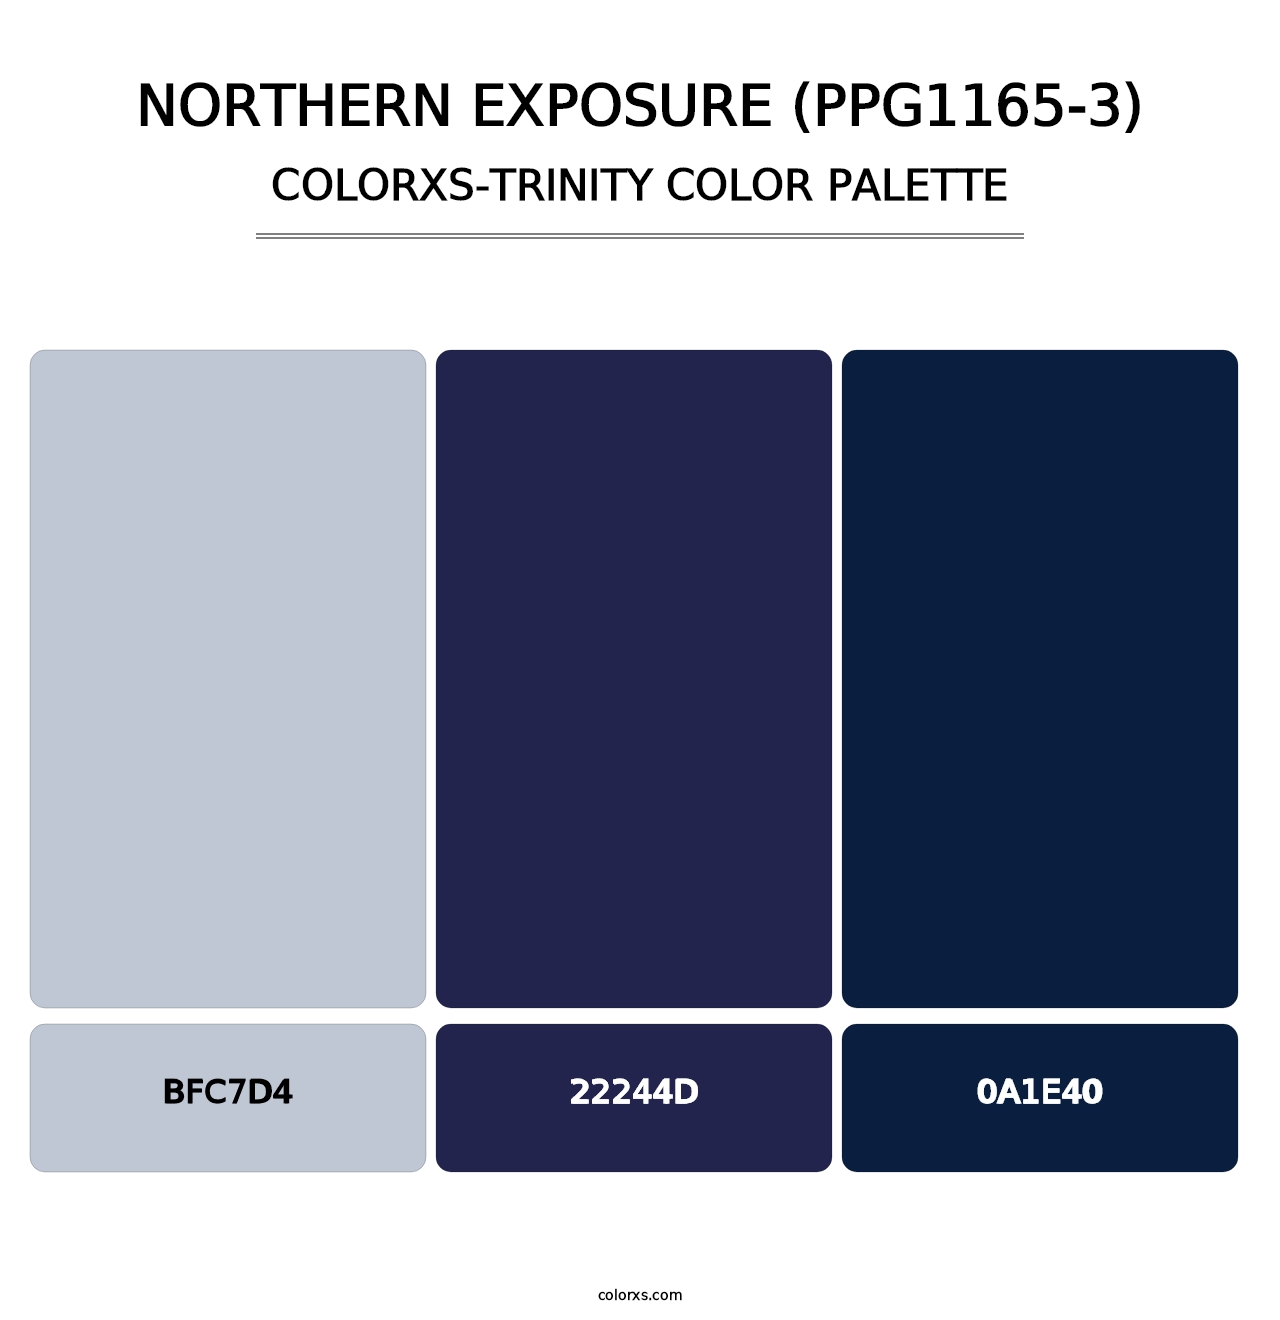 Northern Exposure (PPG1165-3) - Colorxs Trinity Palette